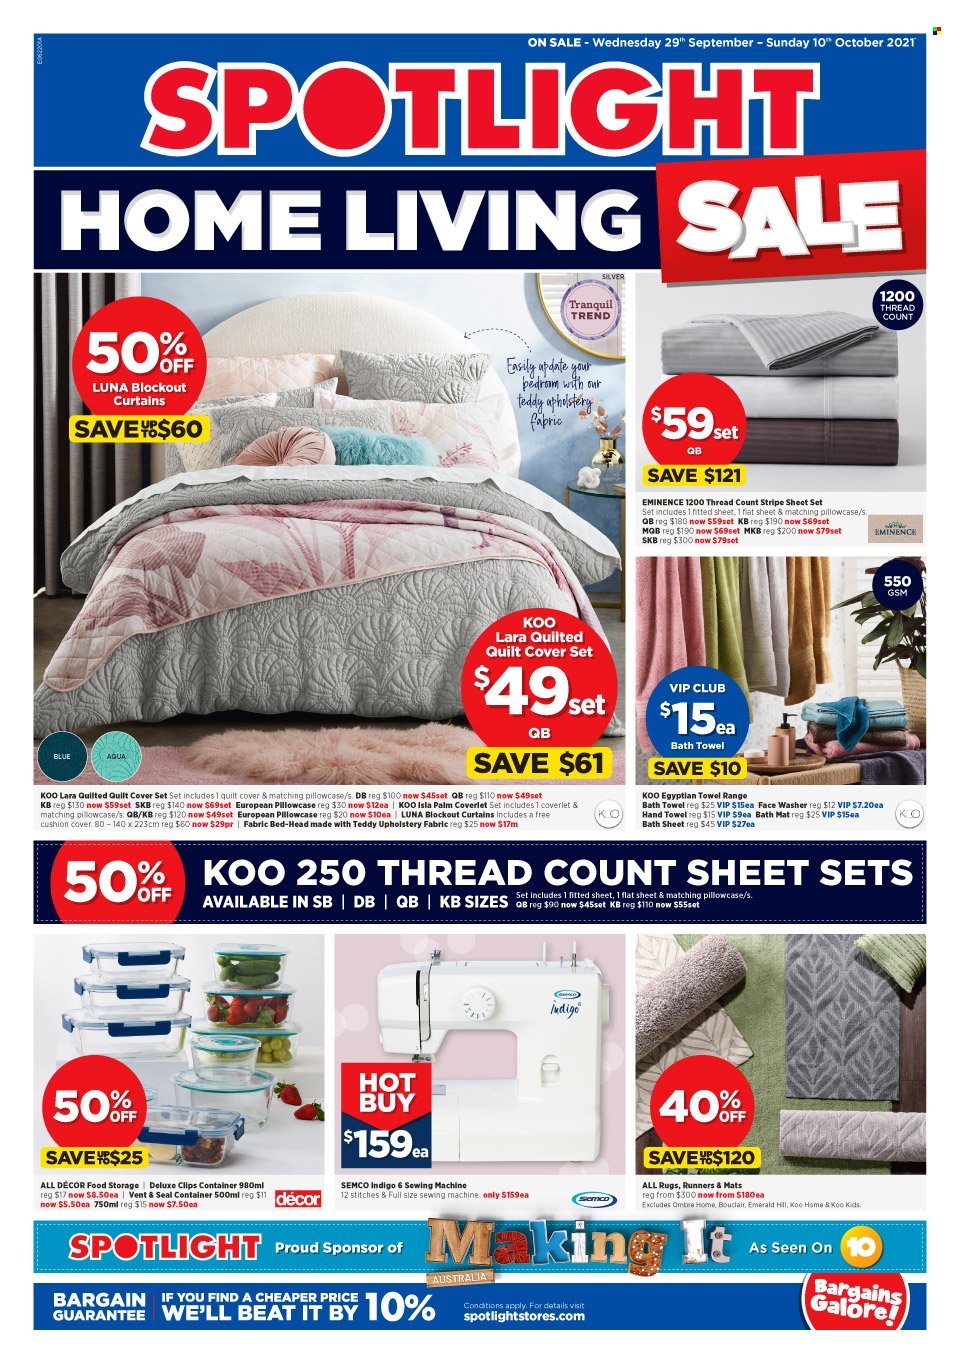 Spotlight Catalogue - 29 Sep 2021 - 10 Oct 2021 - Sales products - container, cushion, pillowcases, quilt, curtains, quilt cover set, bath mat, bath towel, towel, hand towel, sewing machine, teddy. Page 1.